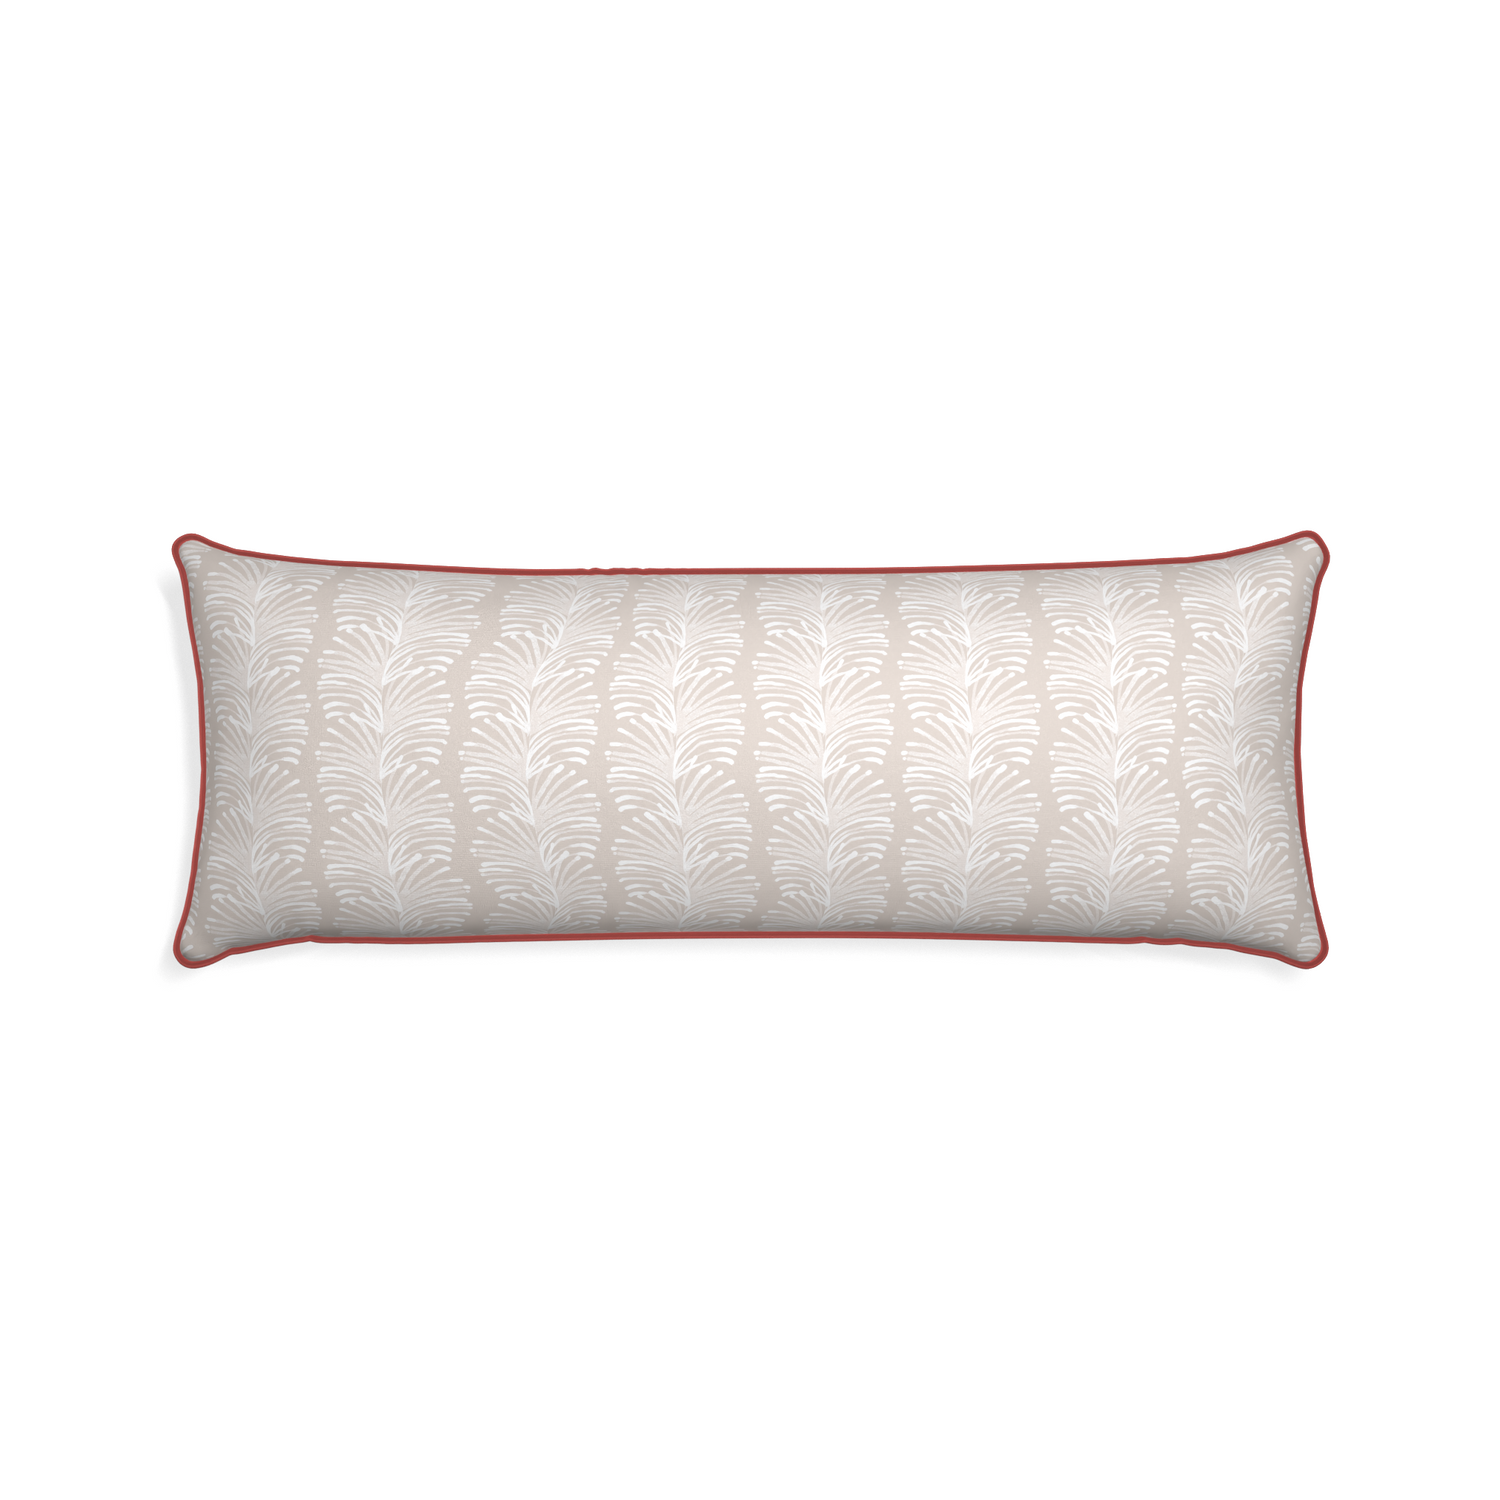 Xl-lumbar emma sand custom pillow with c piping on white background